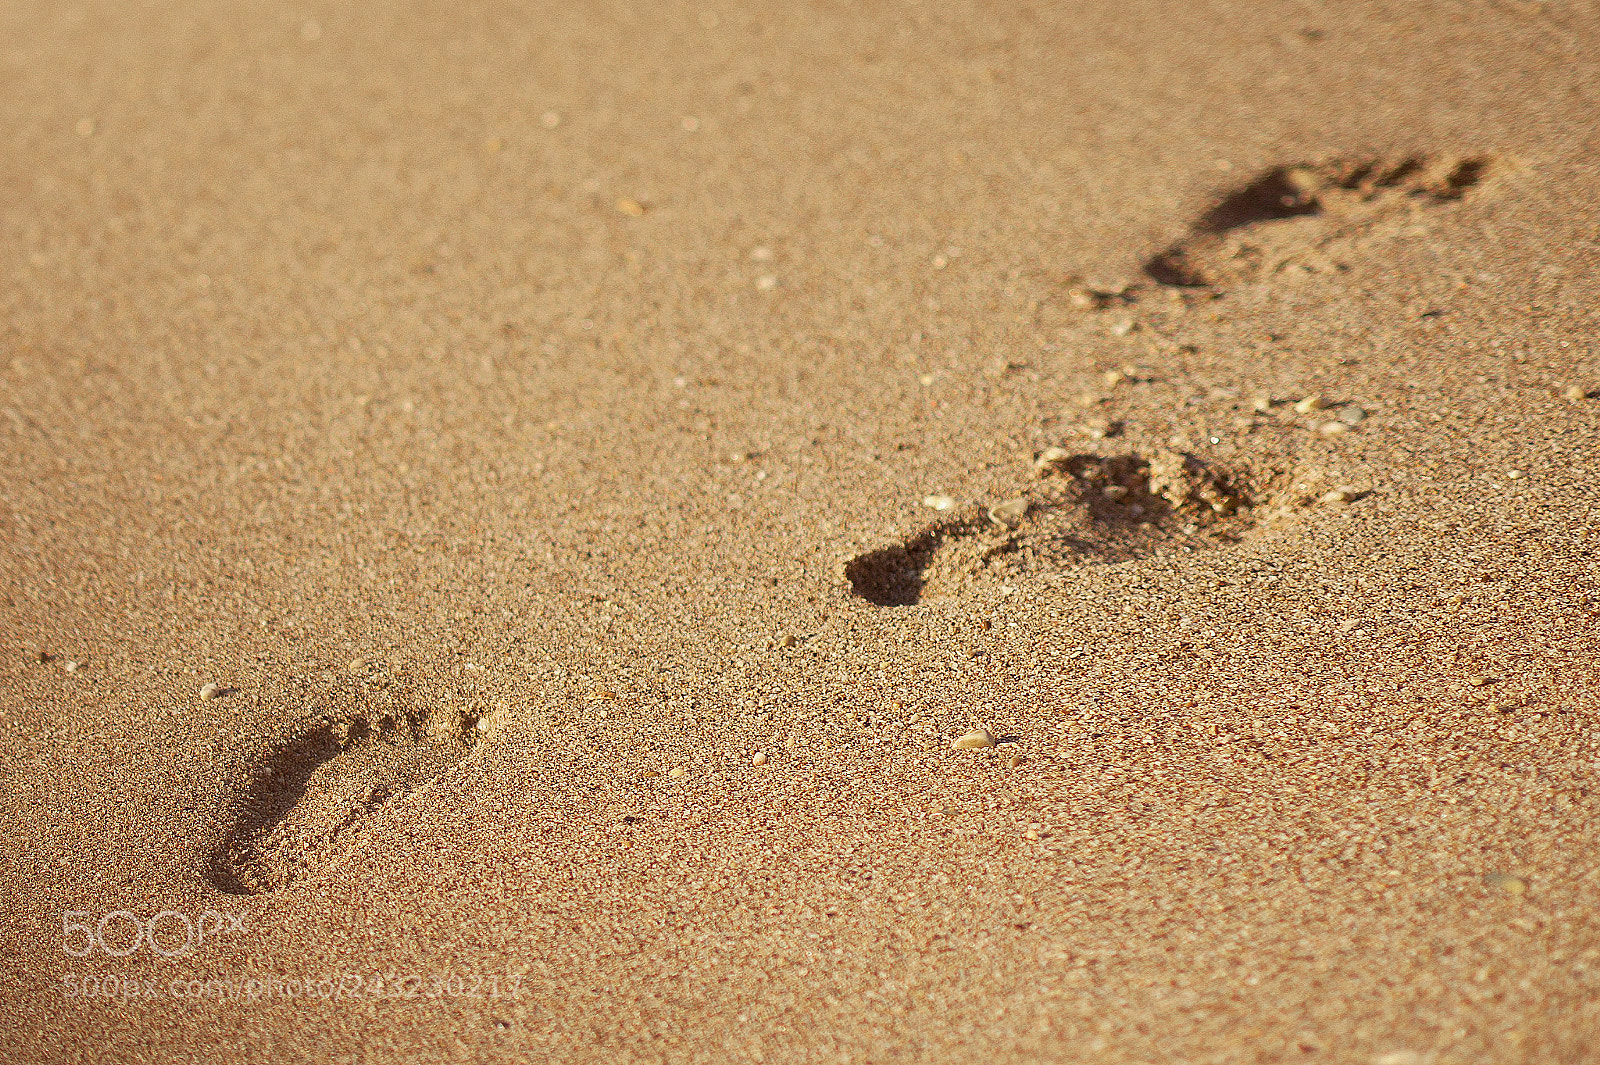 Nikon D700 sample photo. Footprint or trace in photography